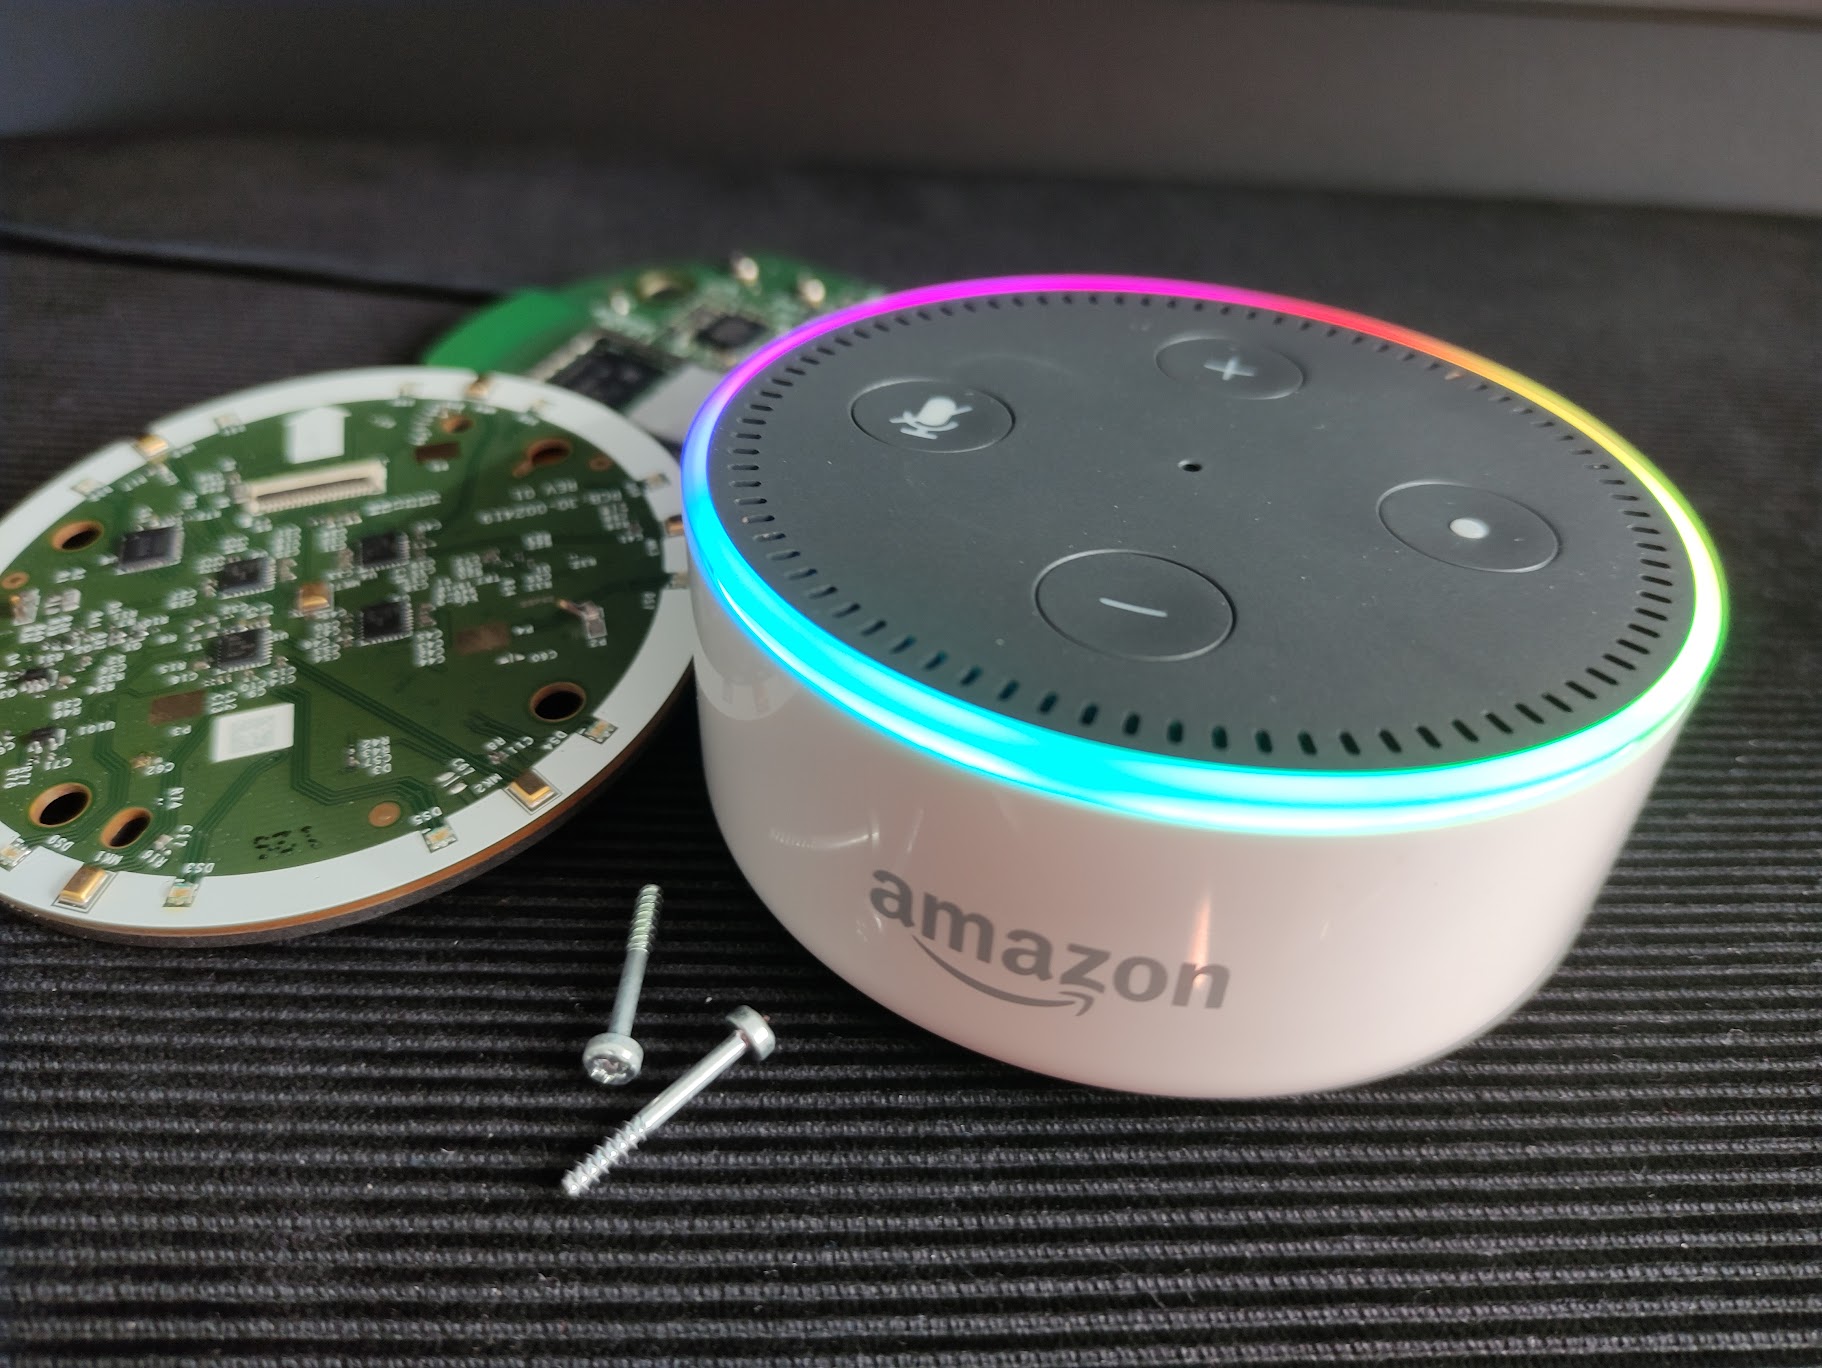 A white amazon echo dot 2nd generation with rainbow lights on its LED ring